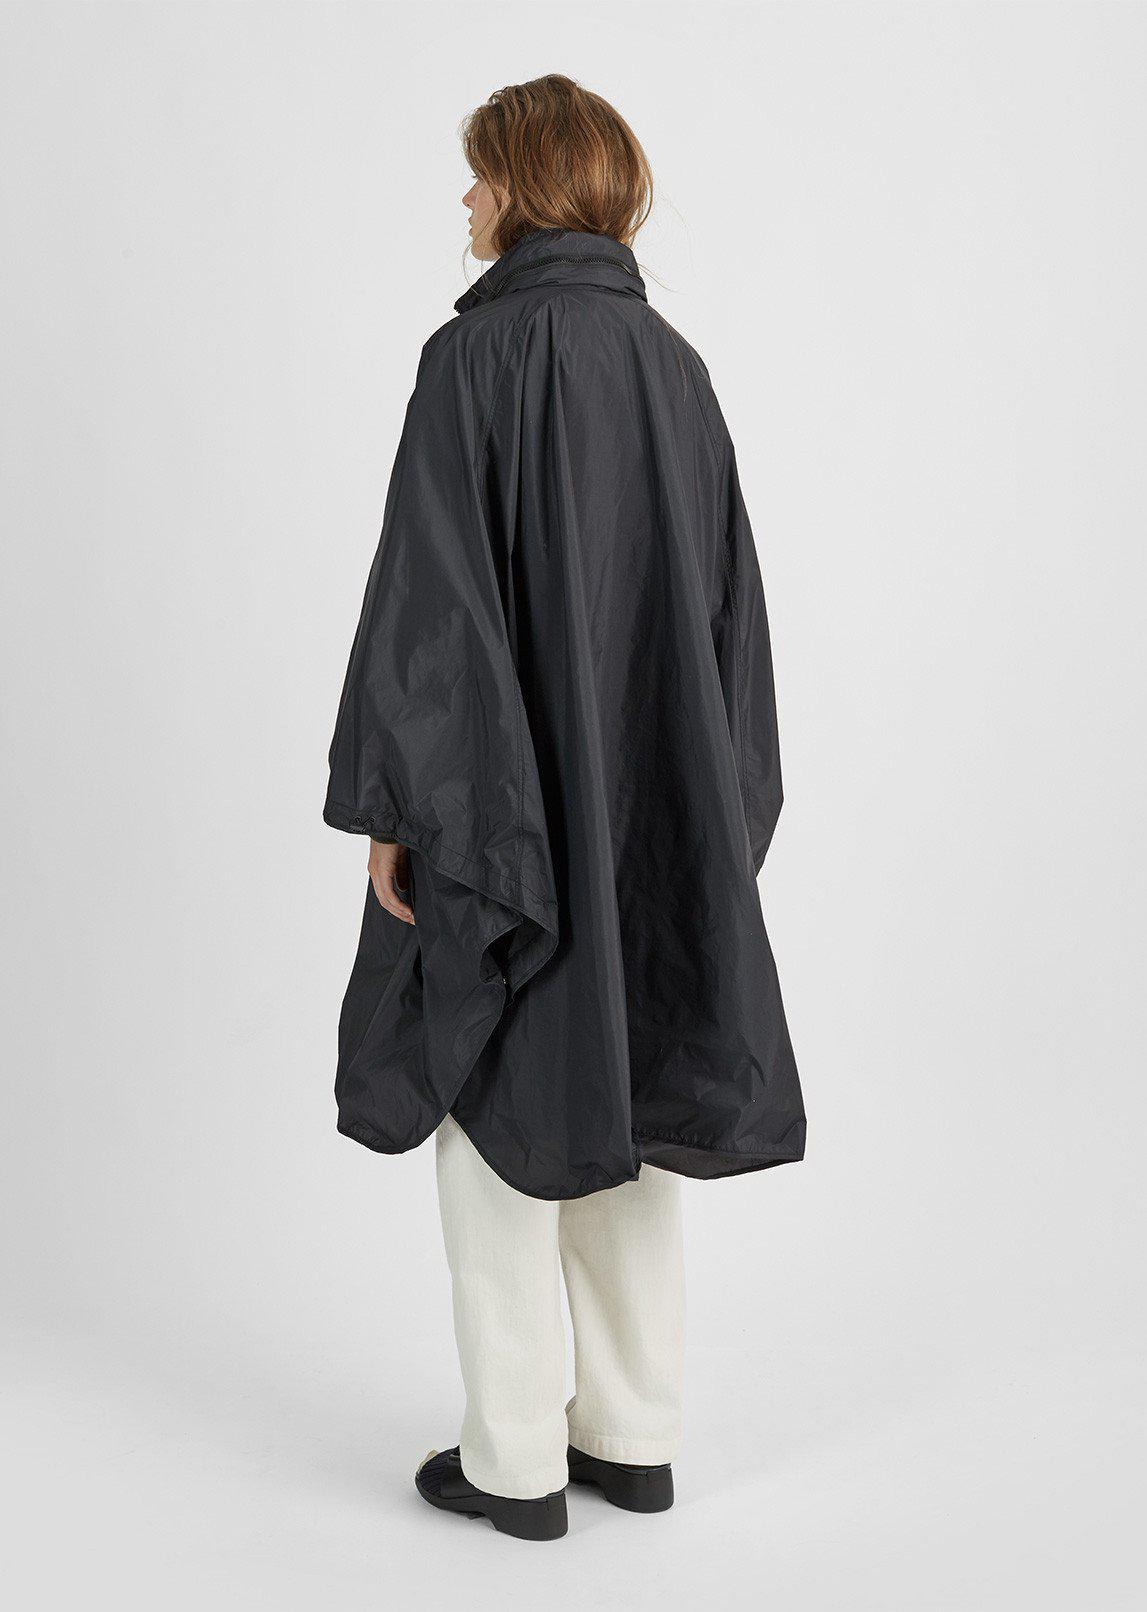 Étoile Isabel Marant Synthetic Christo Hooded Rain Cape in Black - Lyst